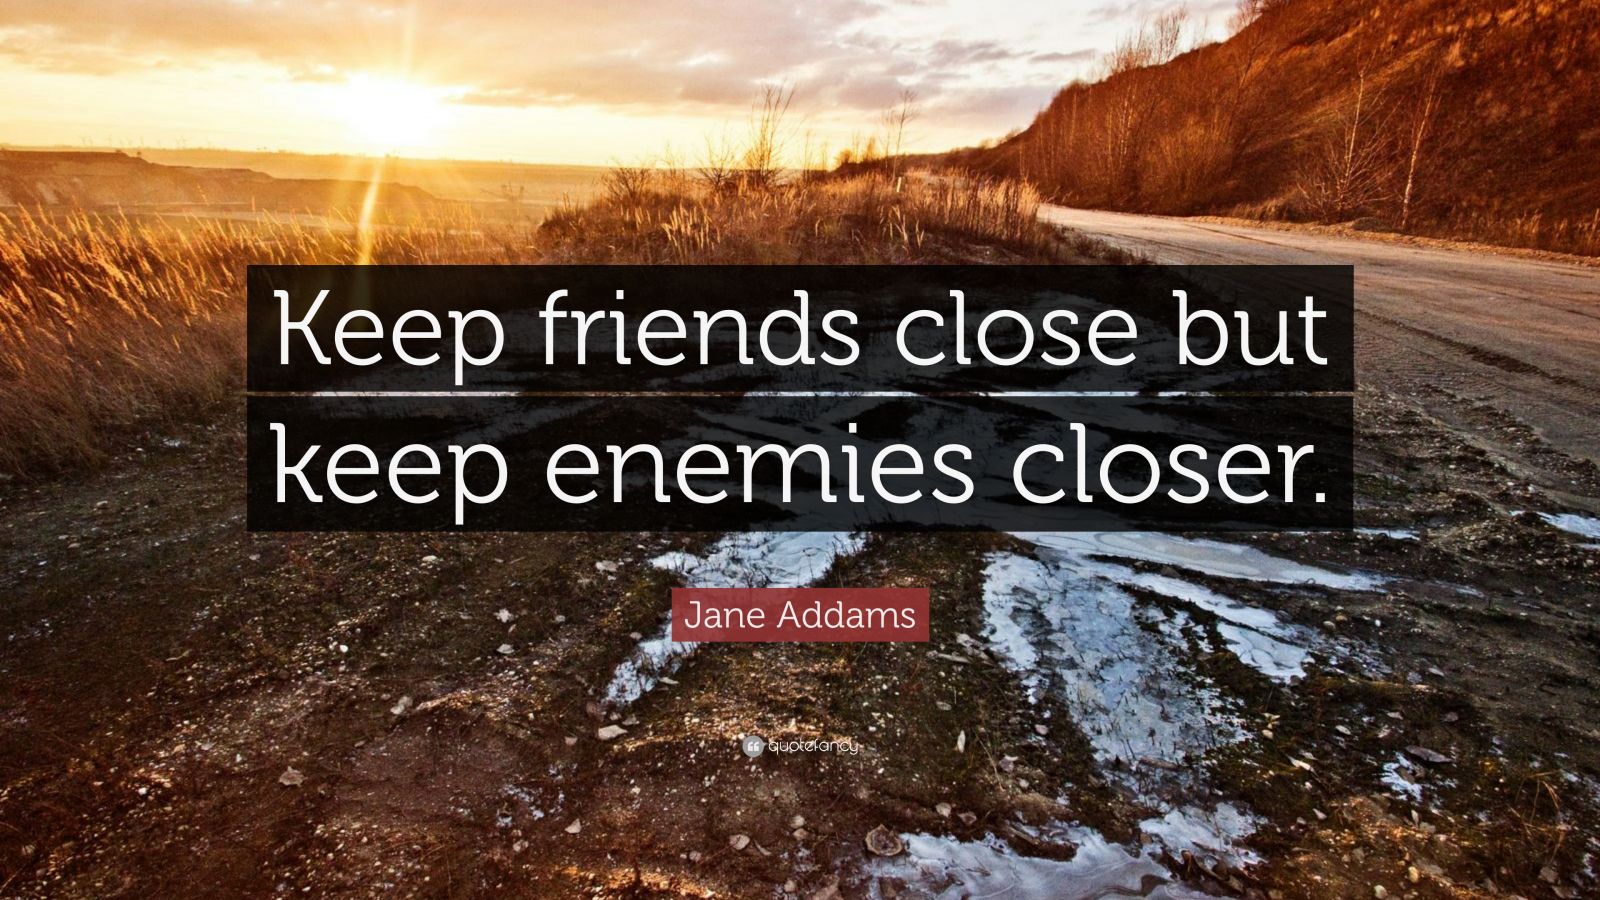 keep your enemies close but your friends closer meaning